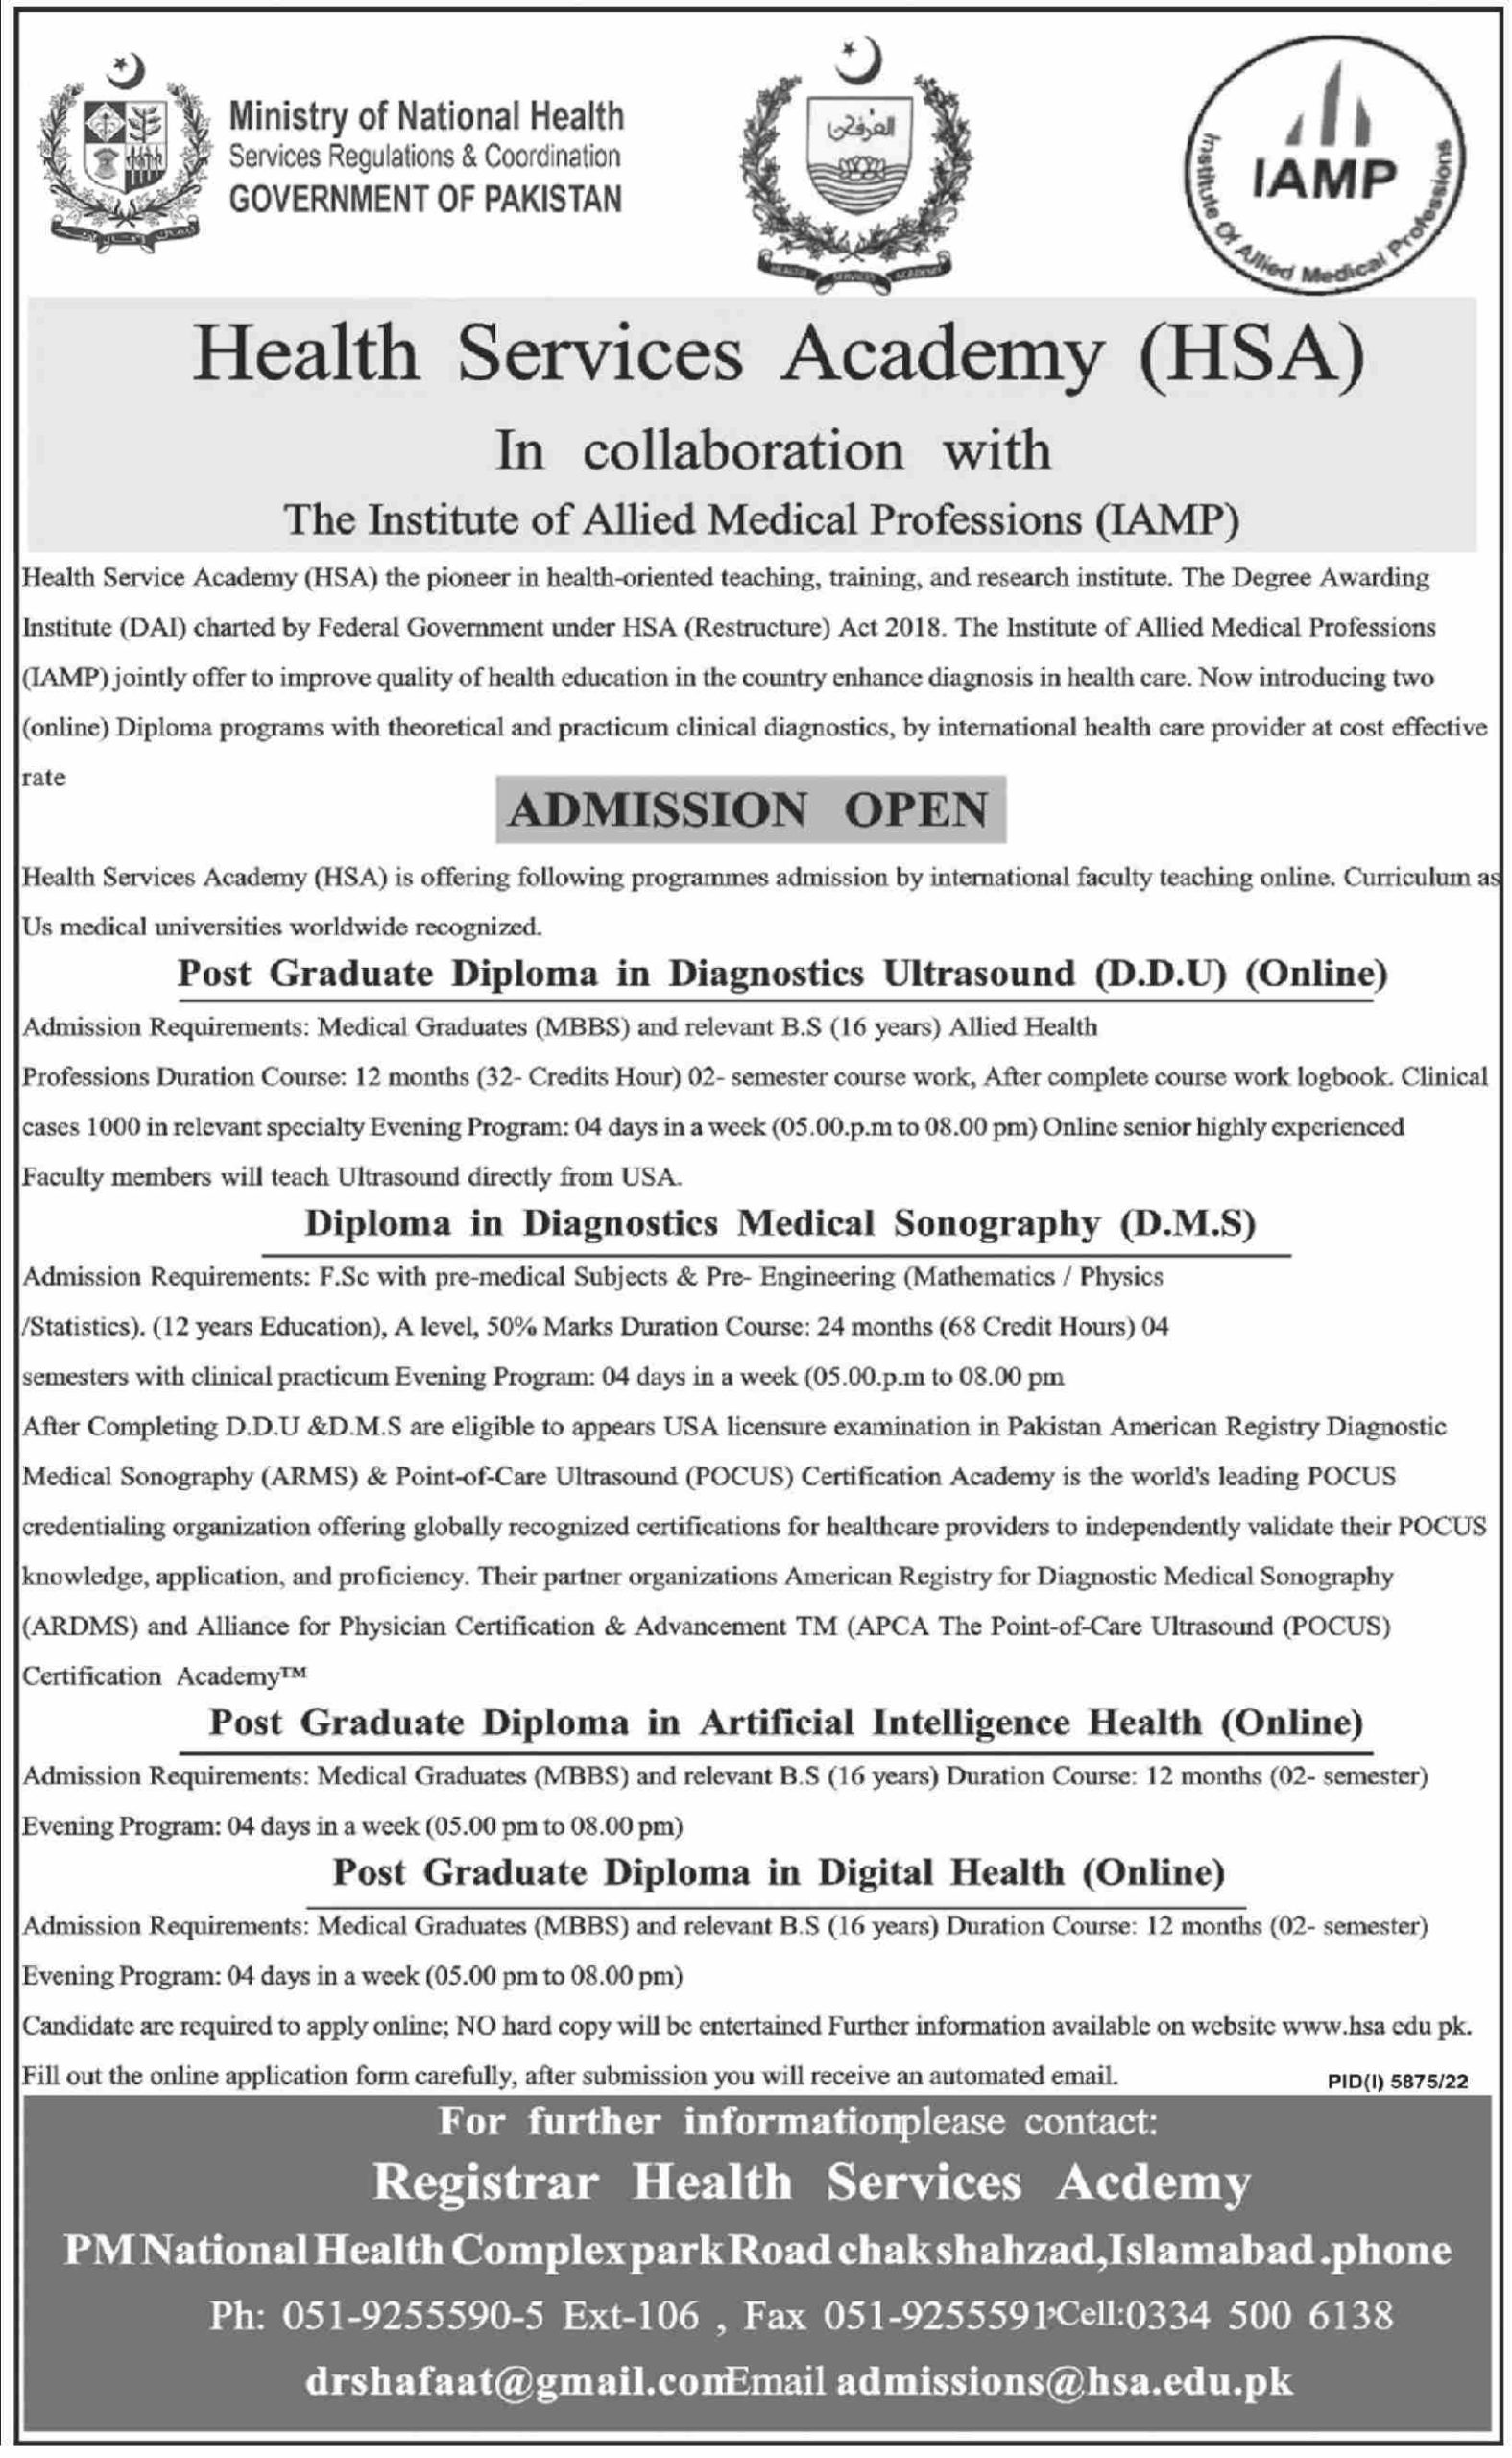 Health Services Academy Islamabad Admissions 2023